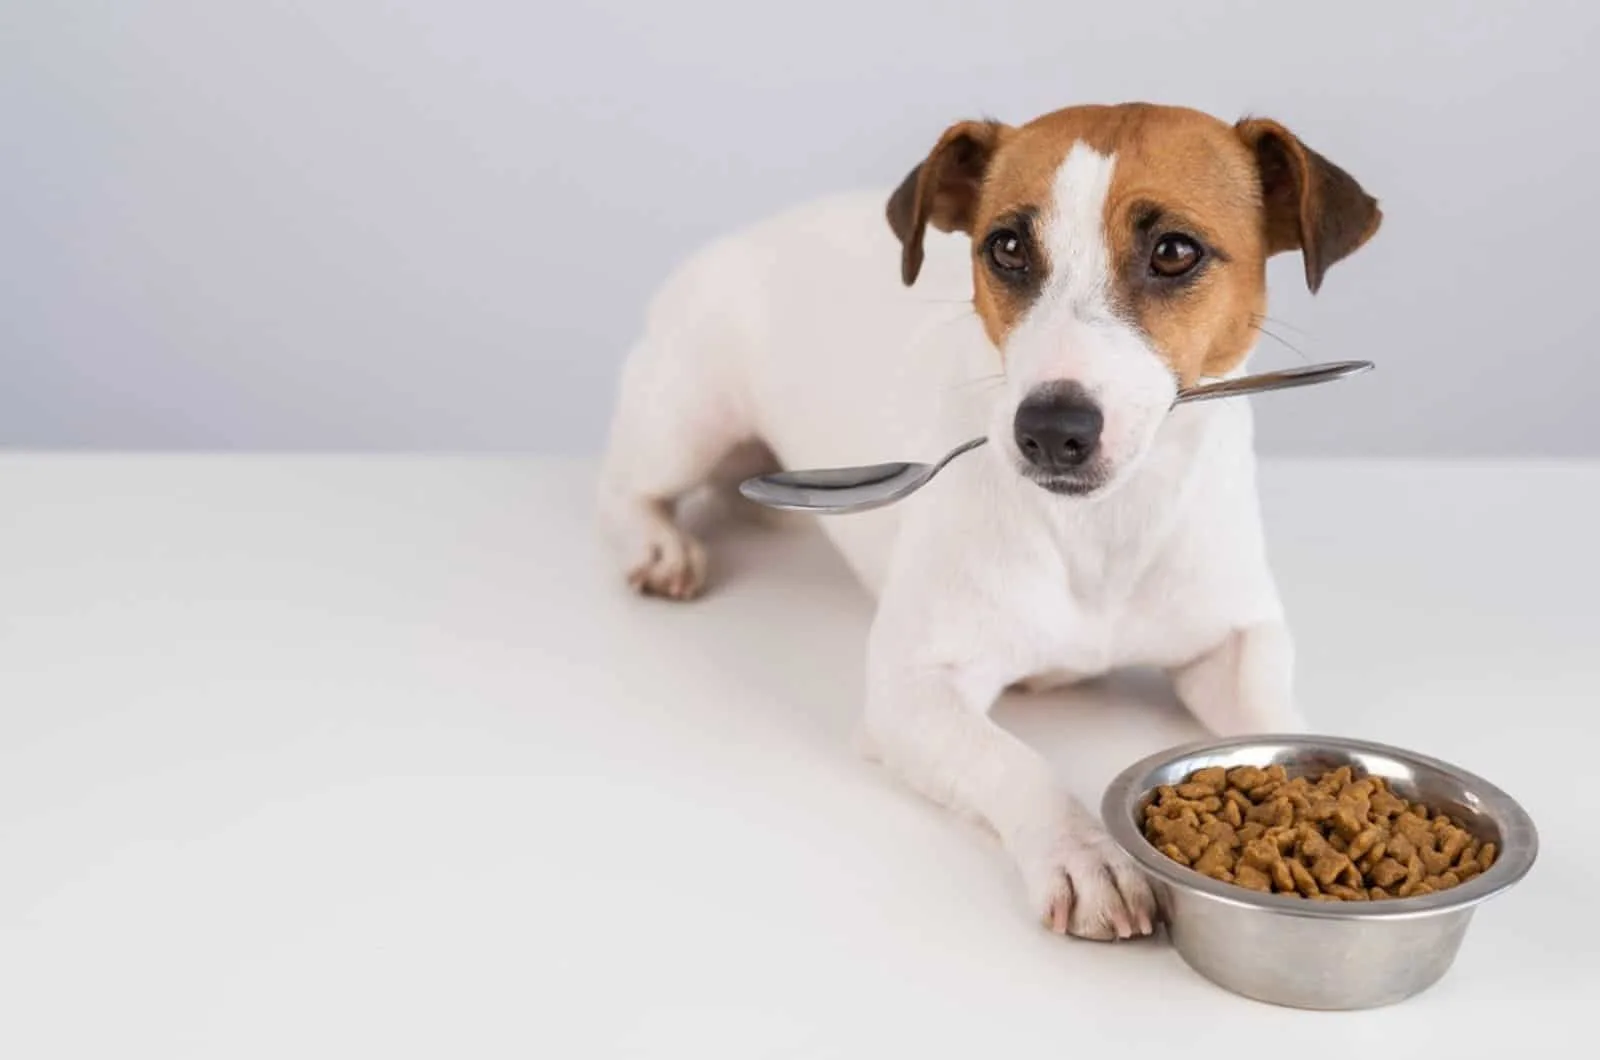 jack russell terrier holding spoon in his mouth and lying beside a bowl with dry food